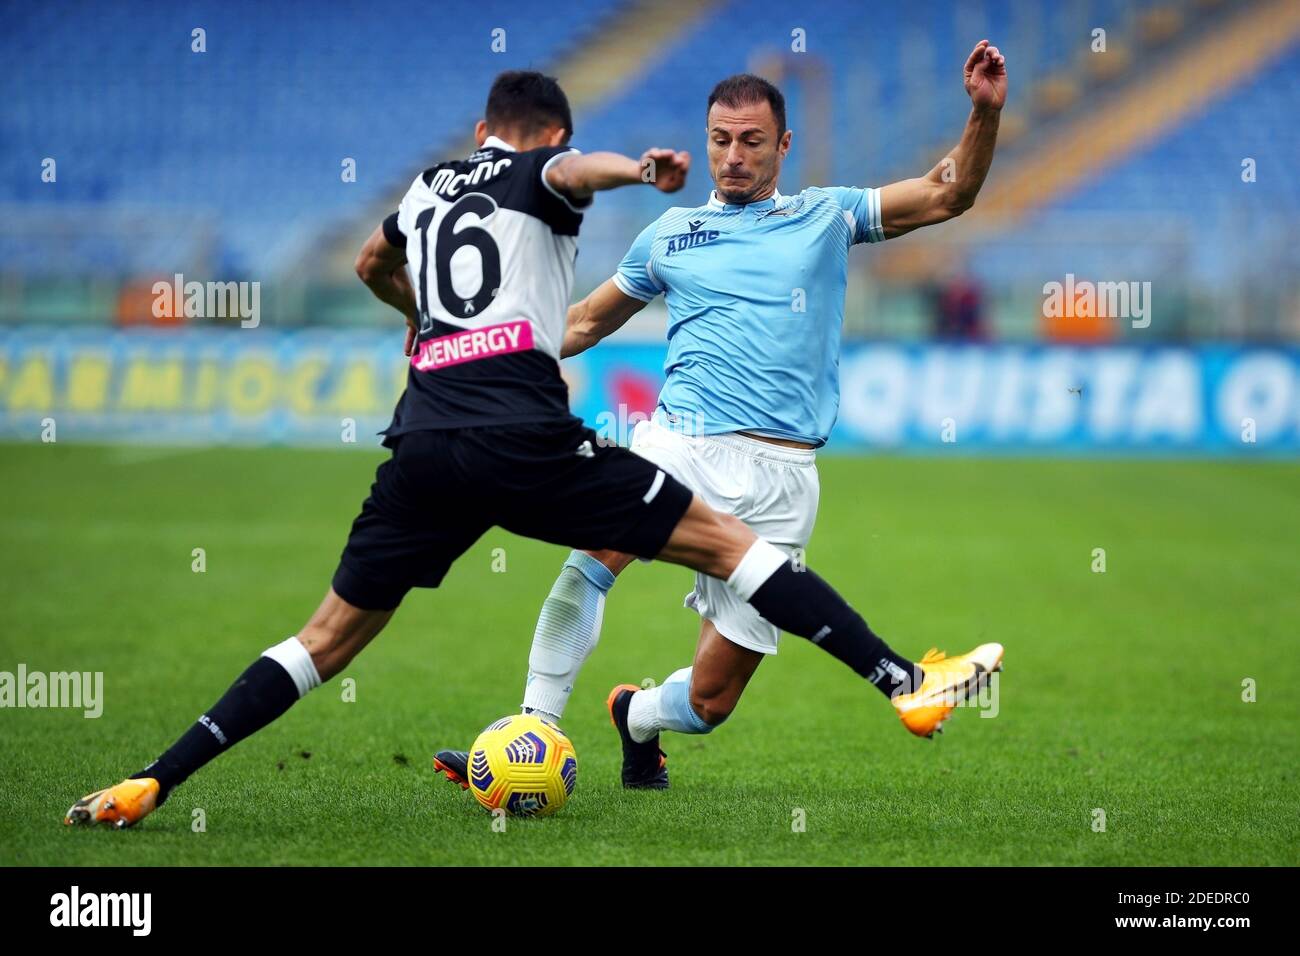 Stefan Radu of Lazio (R) vies for the ball with Nahuel Molina of Udinese during the Italian championship Serie A football m / LM Stock Photo